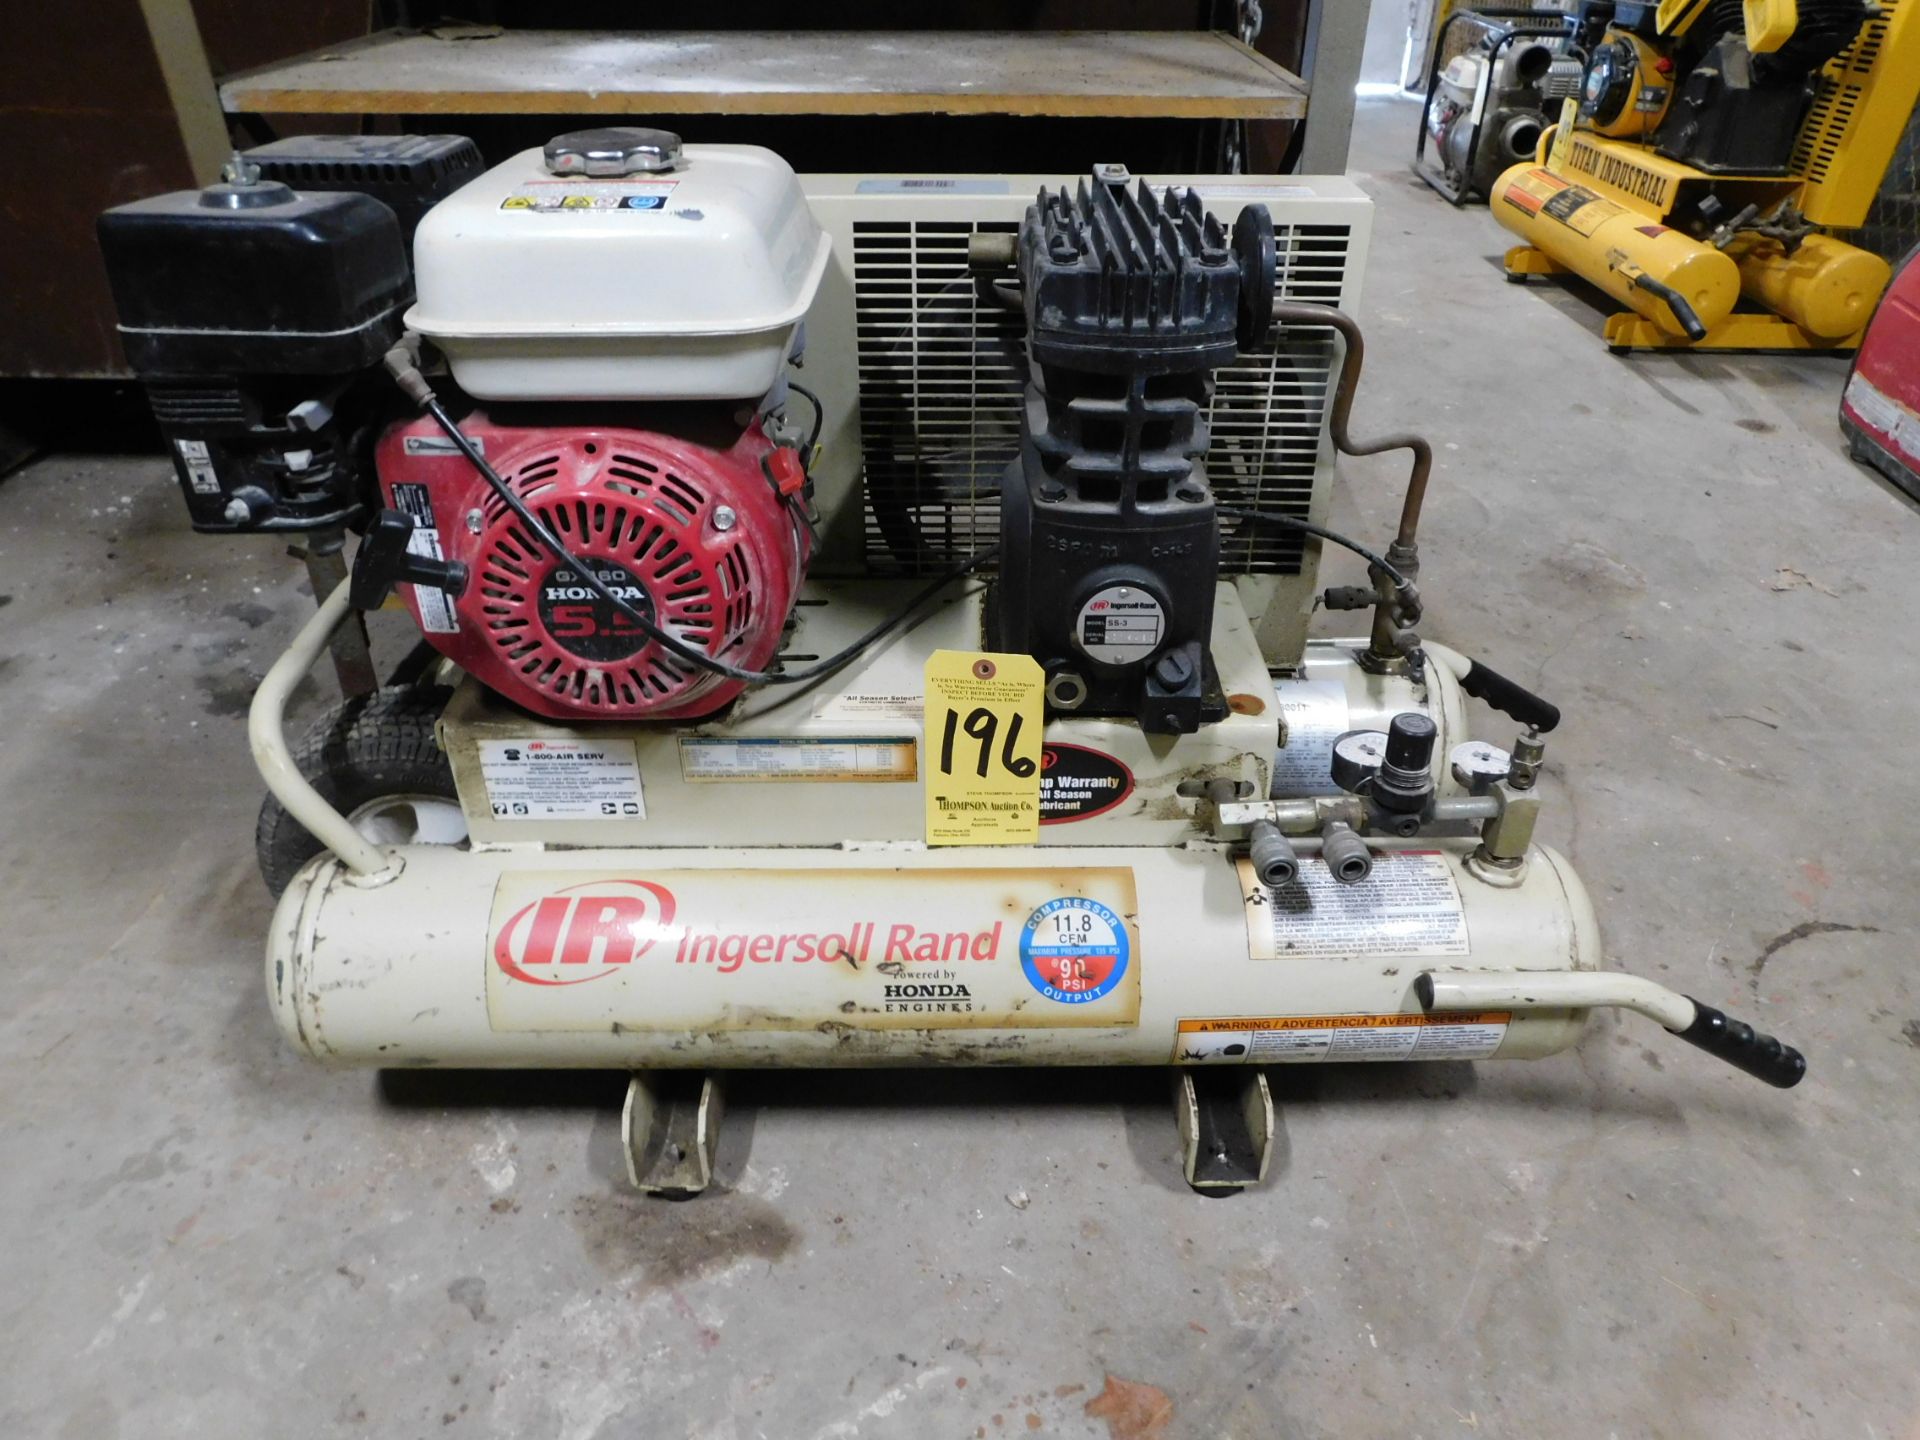 Ingersoll Rand Gas Powered Portable Air compressor,